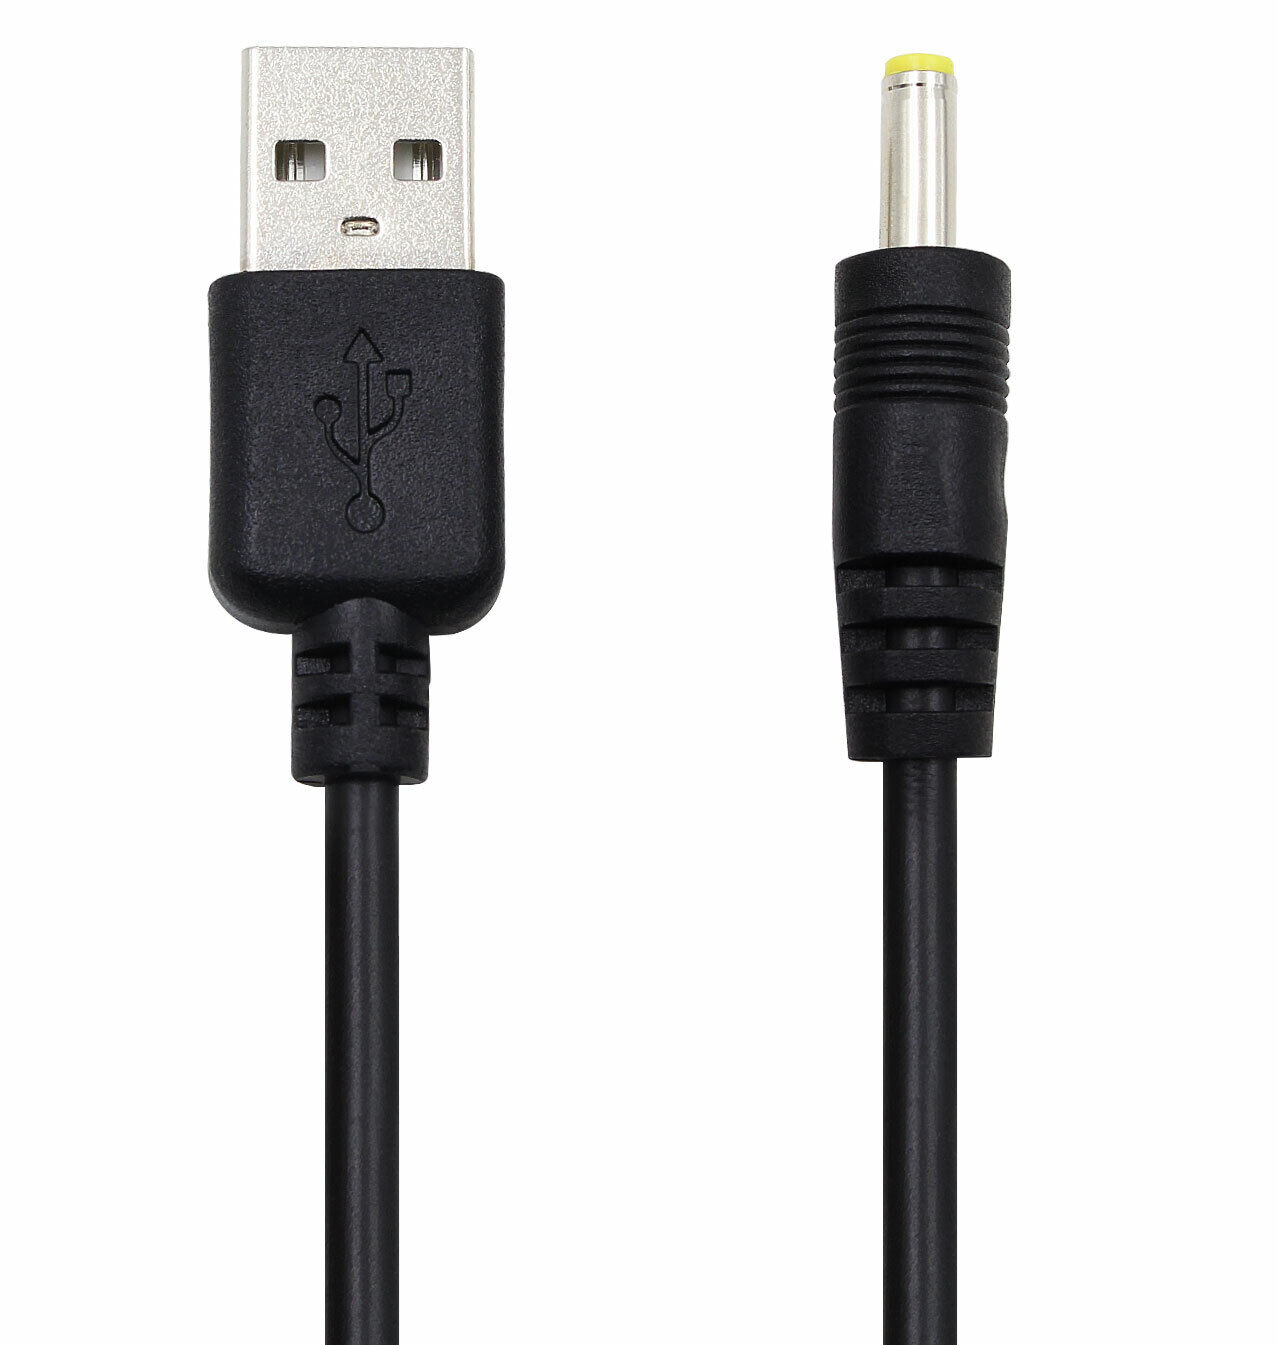 Sony charger cable